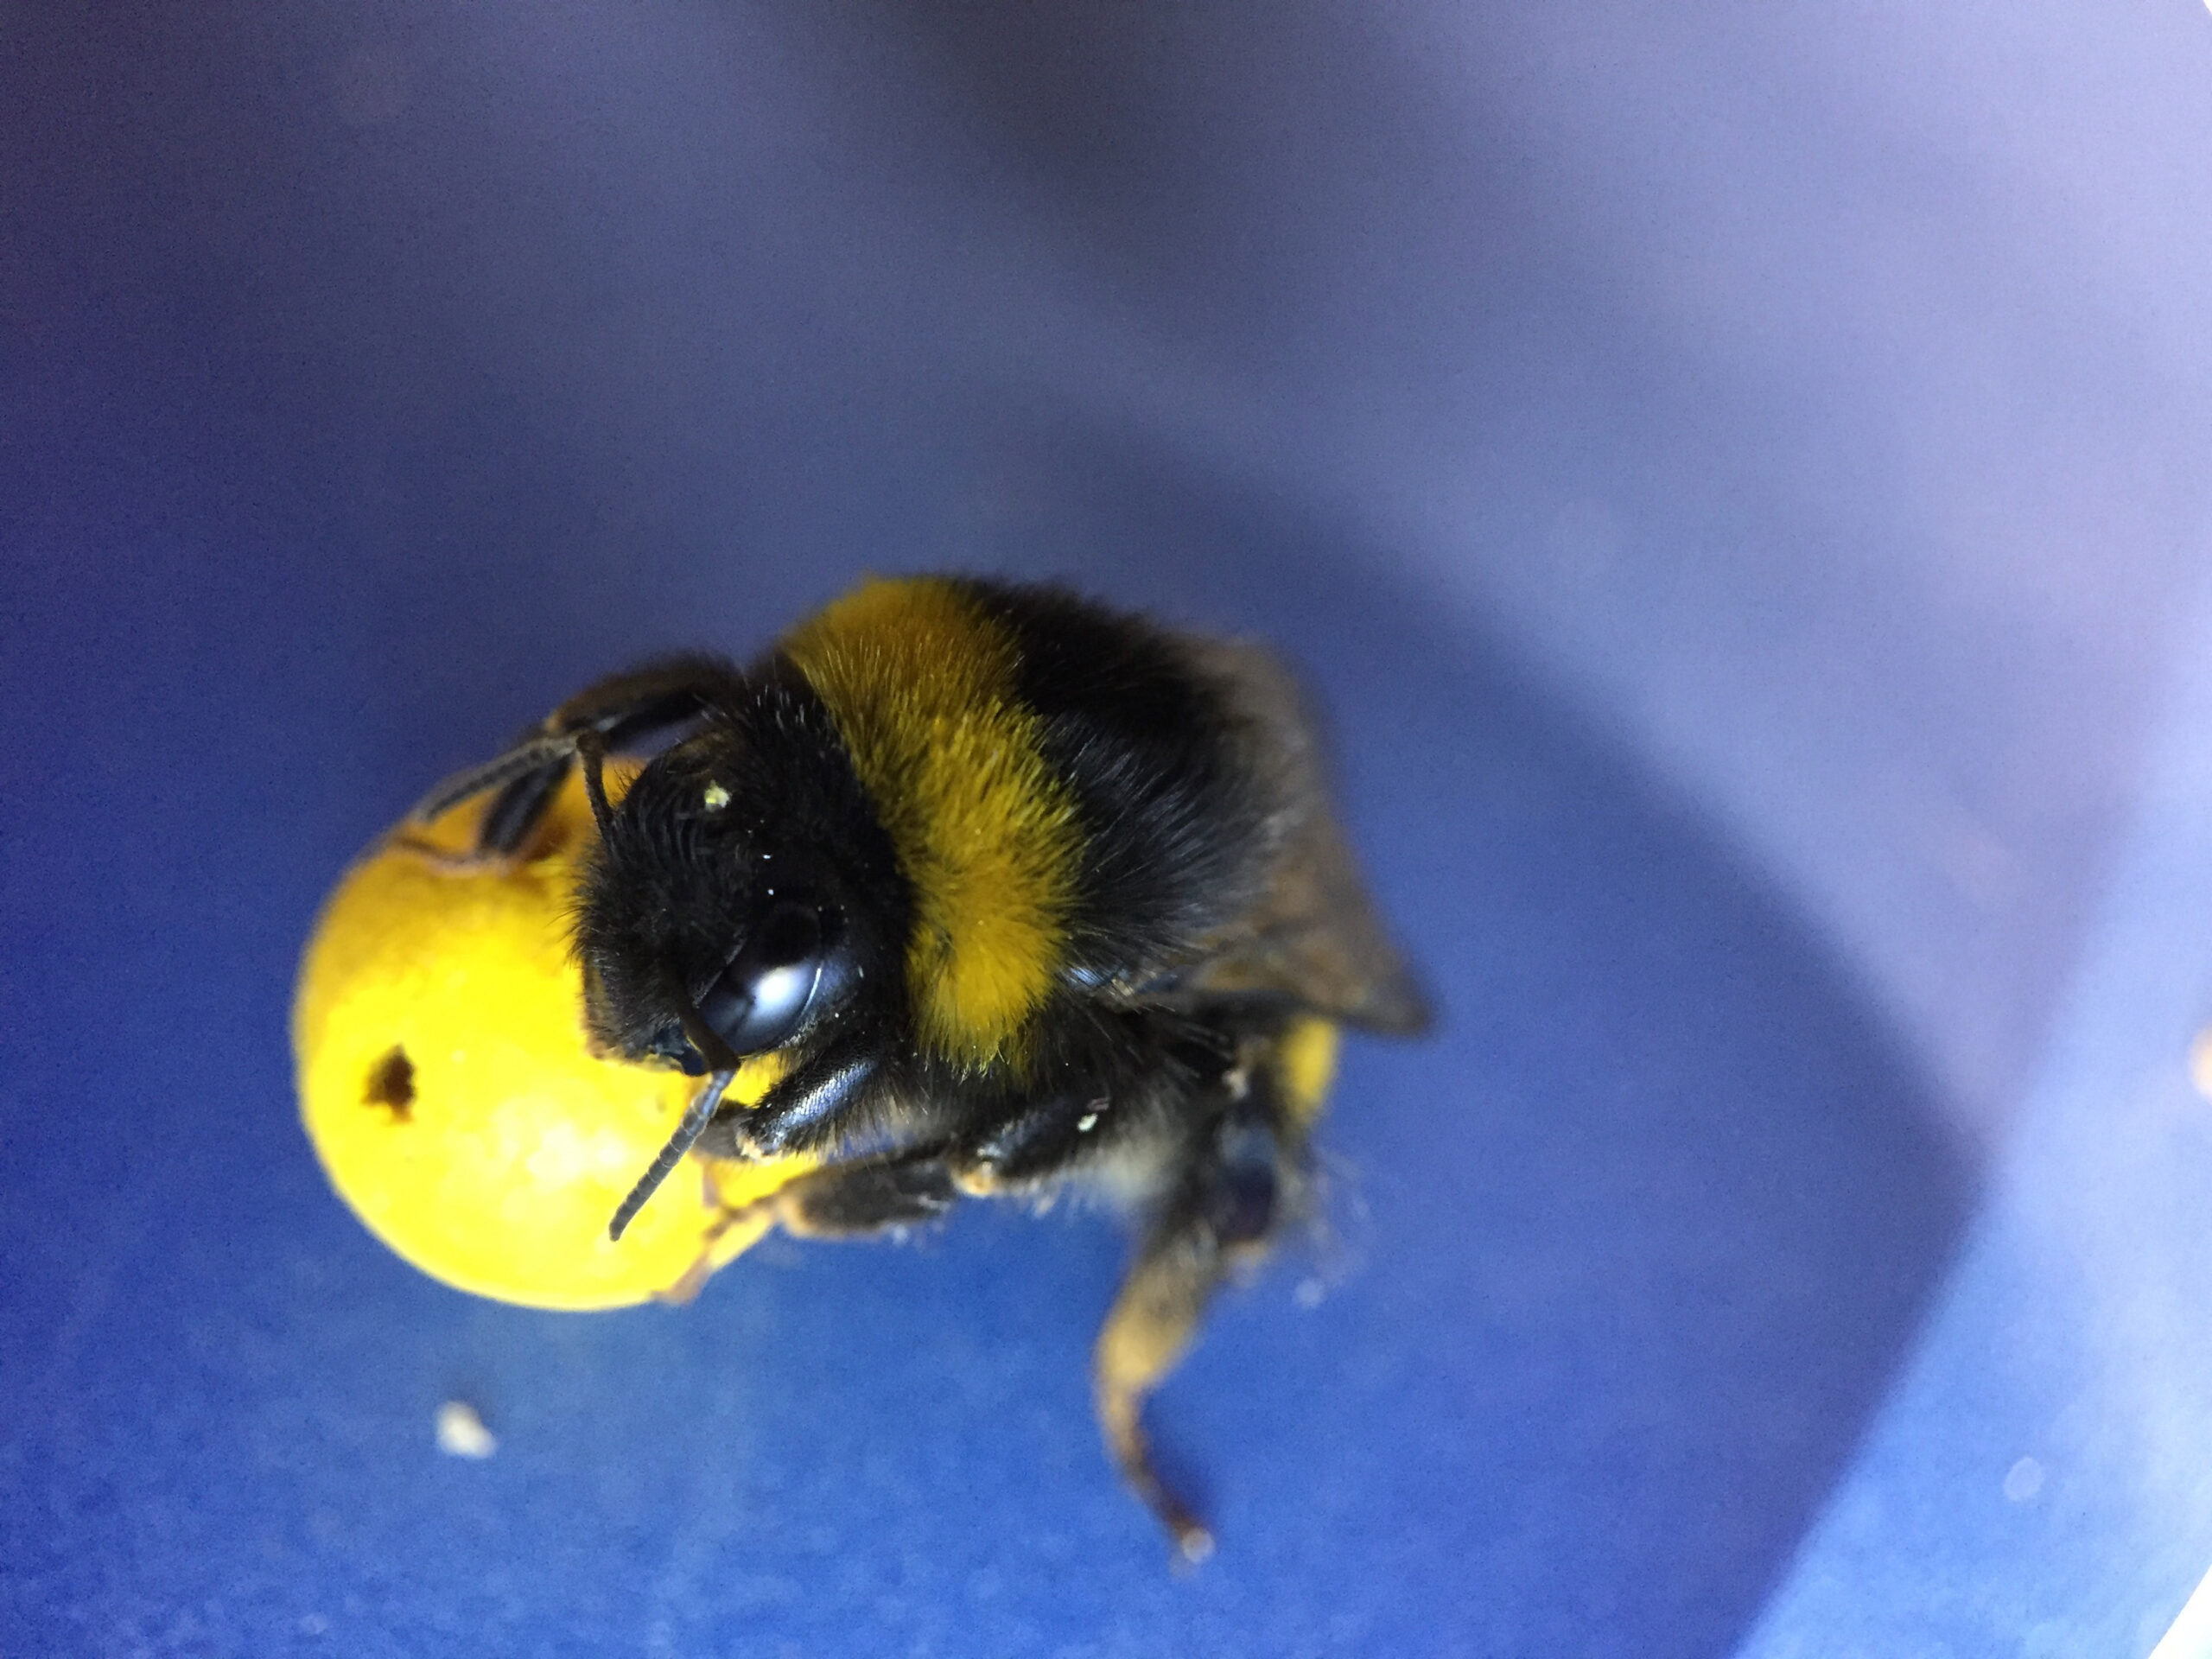 Watch scientists train bees to play with tiny soccer balls